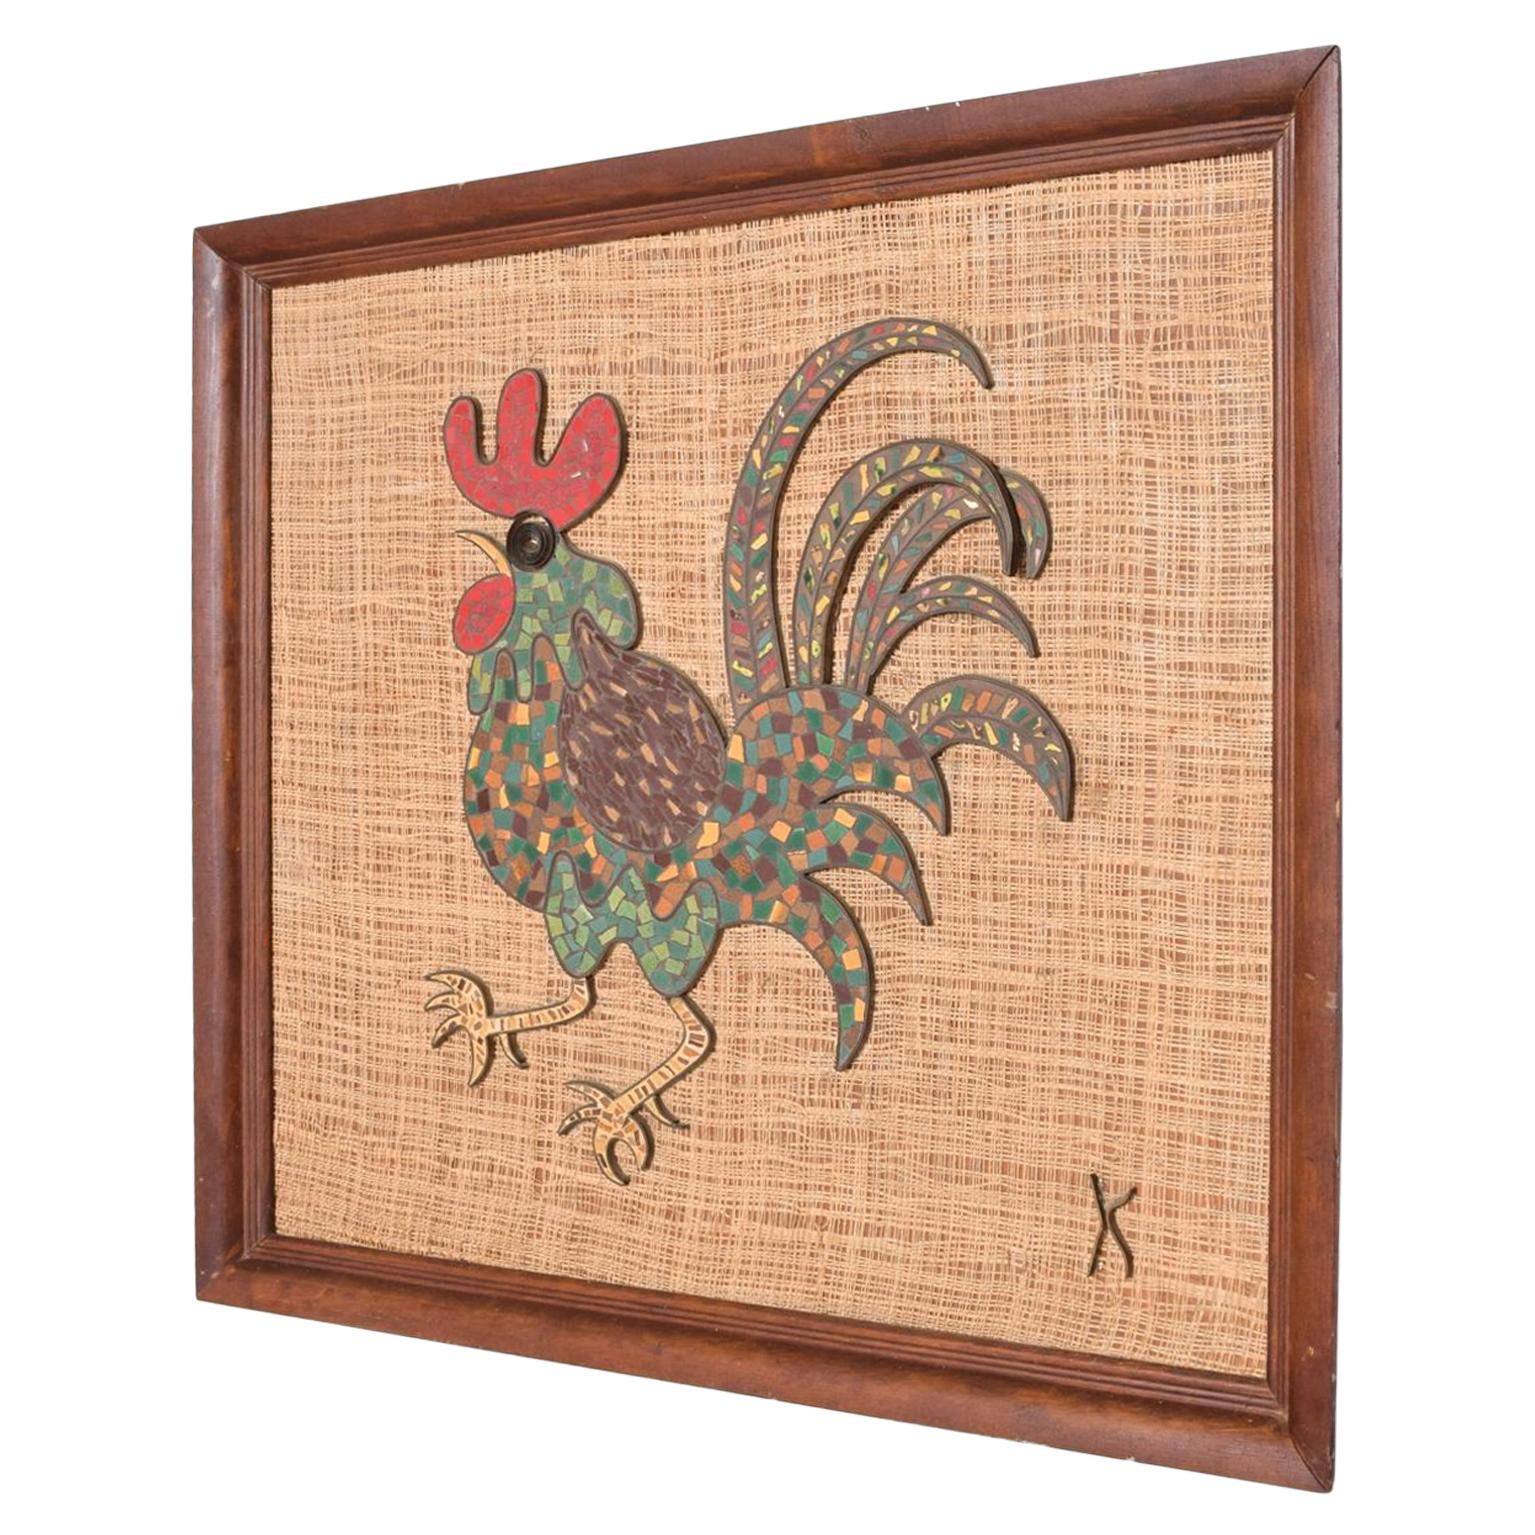 For your pleasure: Mid-Century Modern Mosaic Art in tile and bronze of a rooster. Mid-Century Modern Mosaic tile rooster Evelyn Ackerman art style wall hanging. Dimensions: 24 1/2